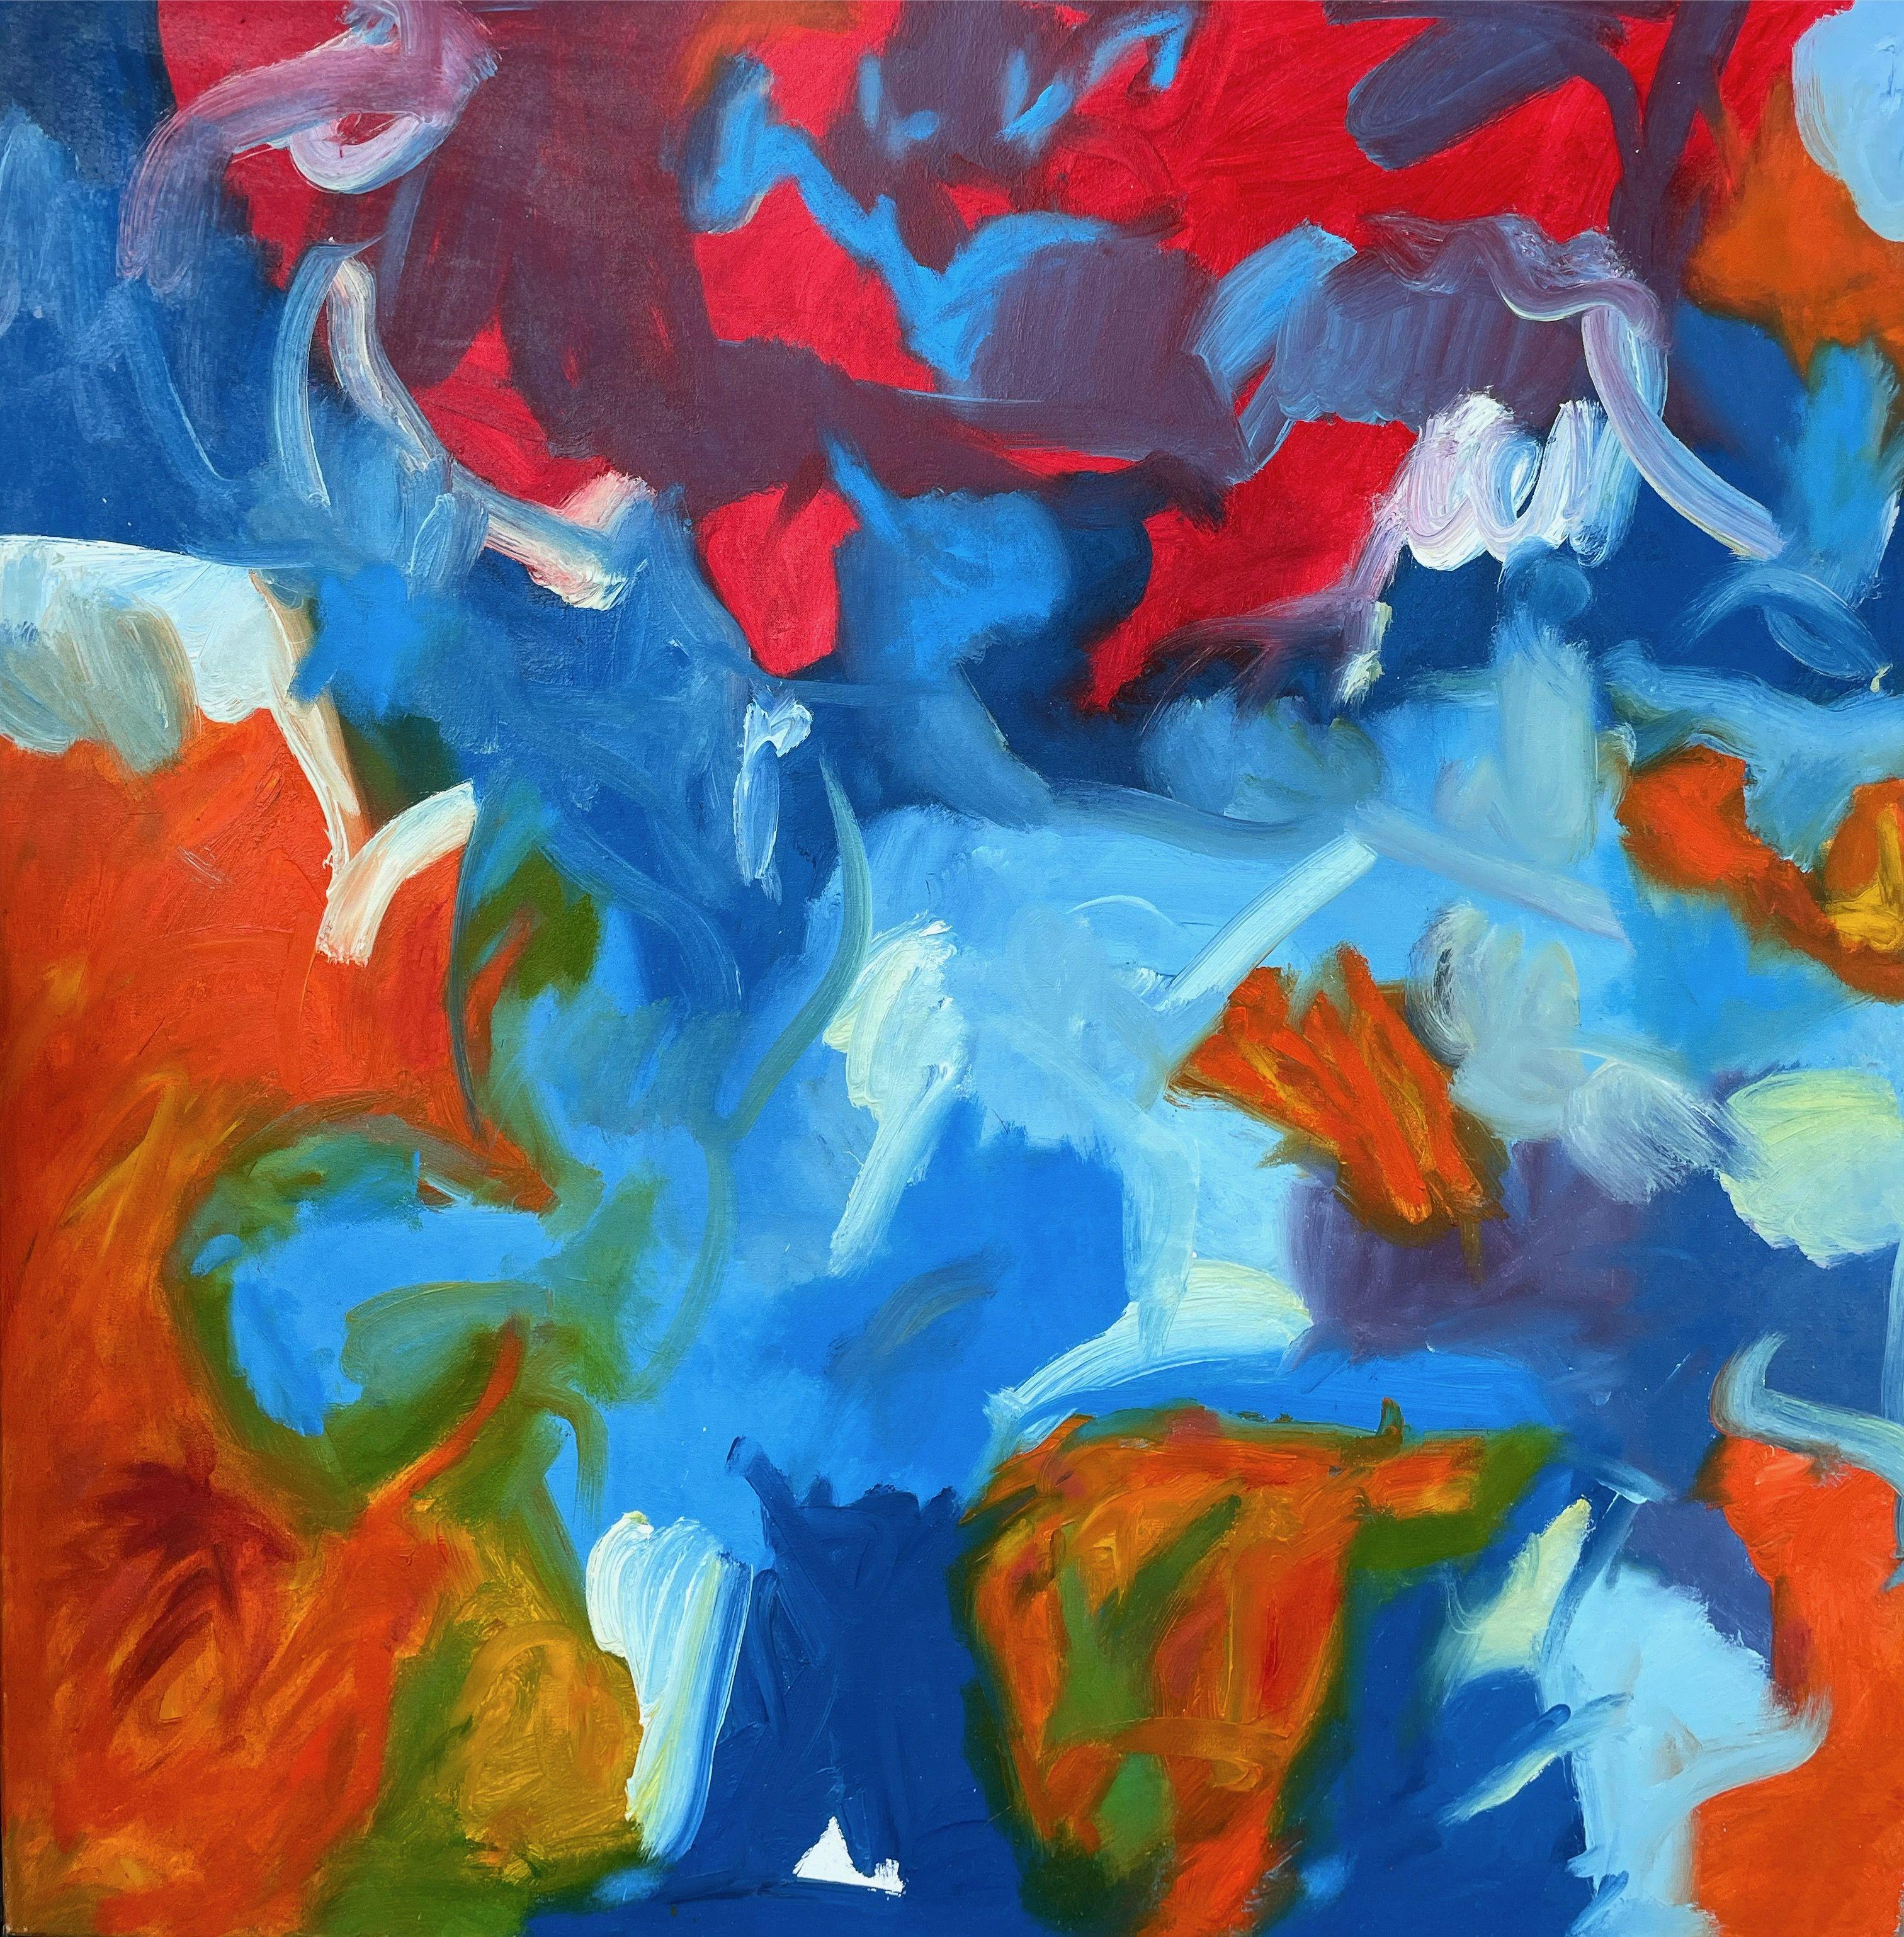 Oil on canvas inspired by natural elements and sculptural influences. My abstract paintings are all about creating excitement for the viewer through concentrated exploration. Each painting is inspired by nature, travels, or imagination and created